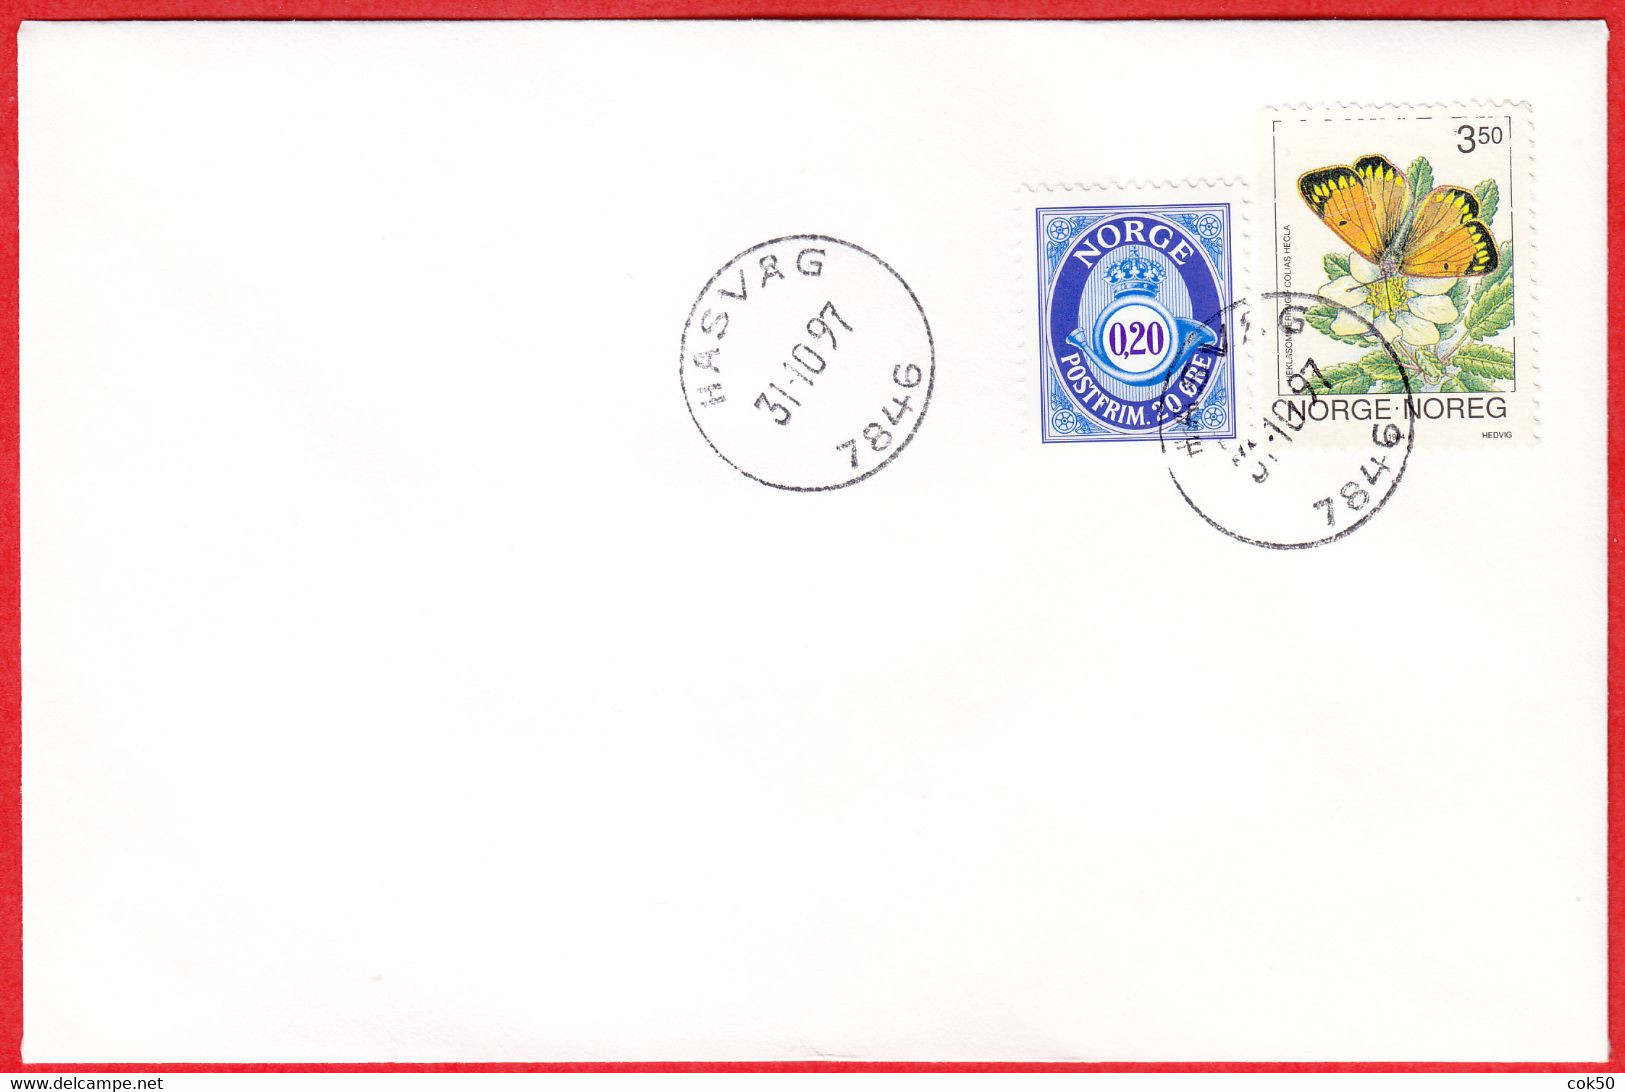 NORWAY -  7846 HASVÅG (Trøndelag County) - Last Day/postoffice Closed On 1997.10.31 - Local Post Stamps